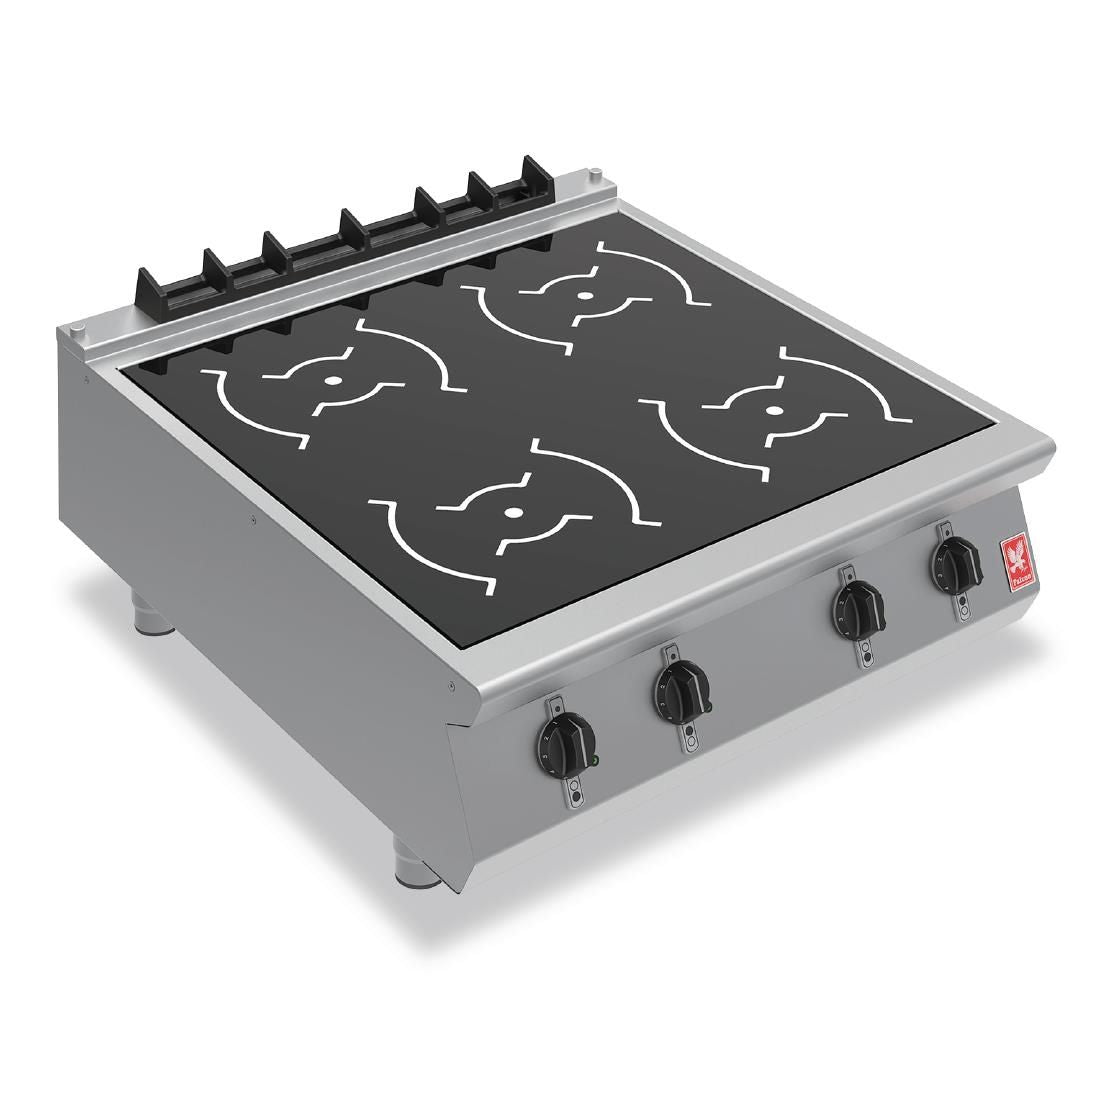 Falcon F900 Four Zone Induction Hob i9084 JD Catering Equipment Solutions Ltd